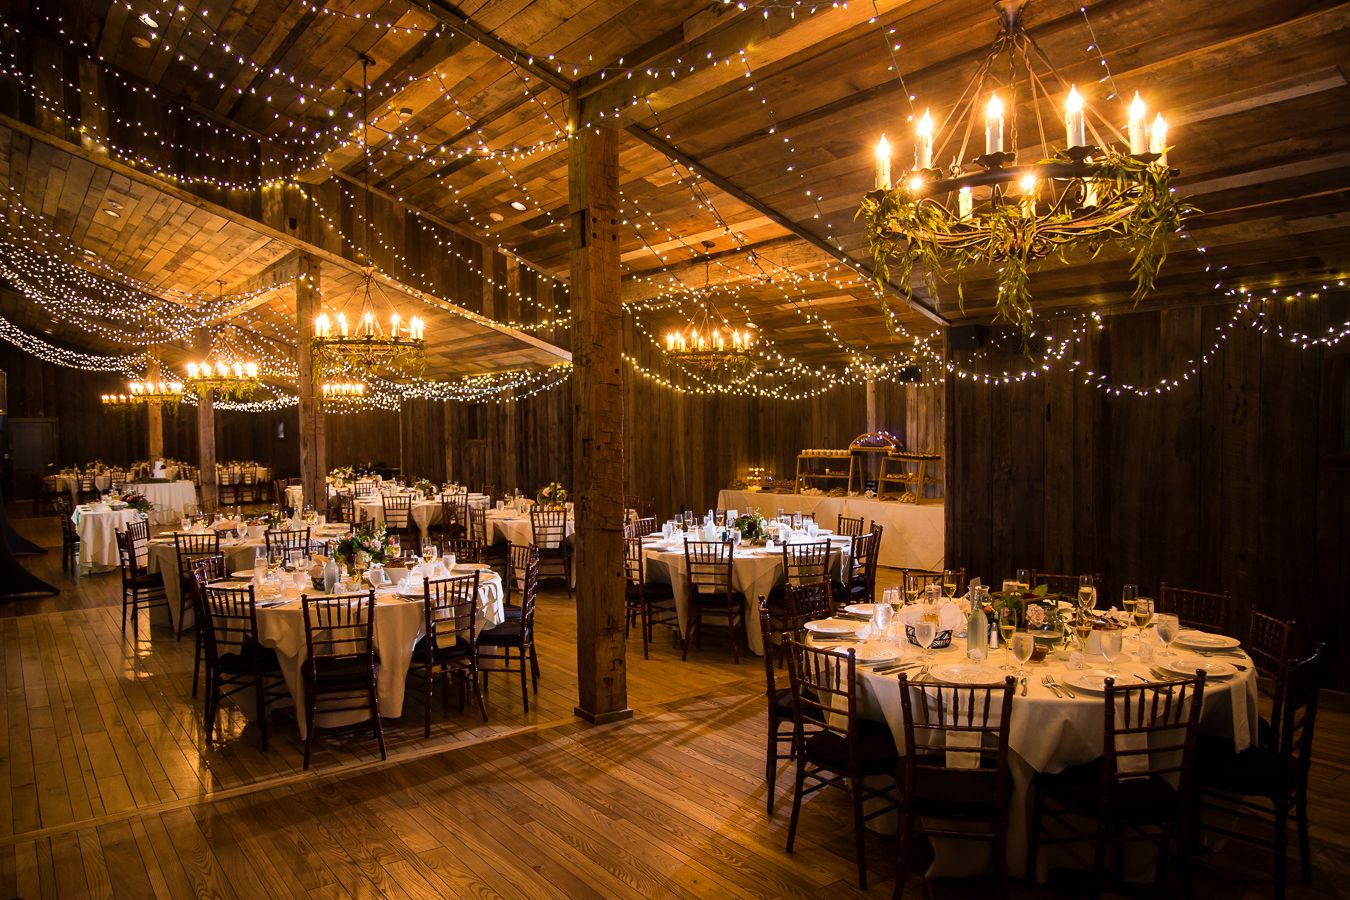 image of the inside of the barn all decorated with twinkle lights and decor for this oak lodge wedding reception which also includes the Pittsburgh cookie table tradition